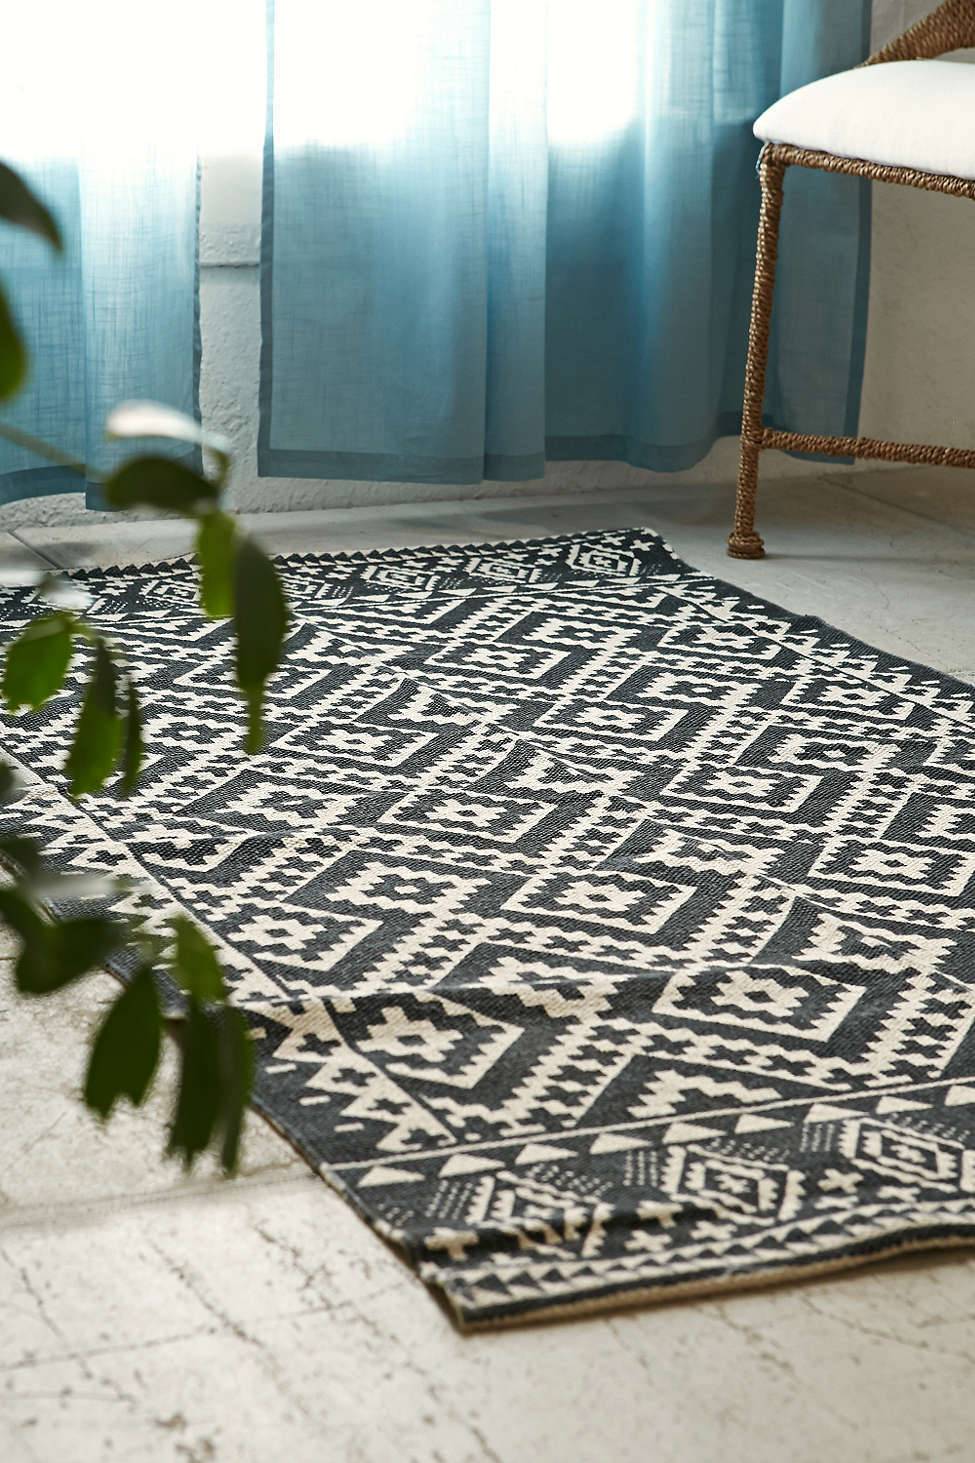 Shopping Guide: 10 Gorgeous Southwest-Inspired Rugs